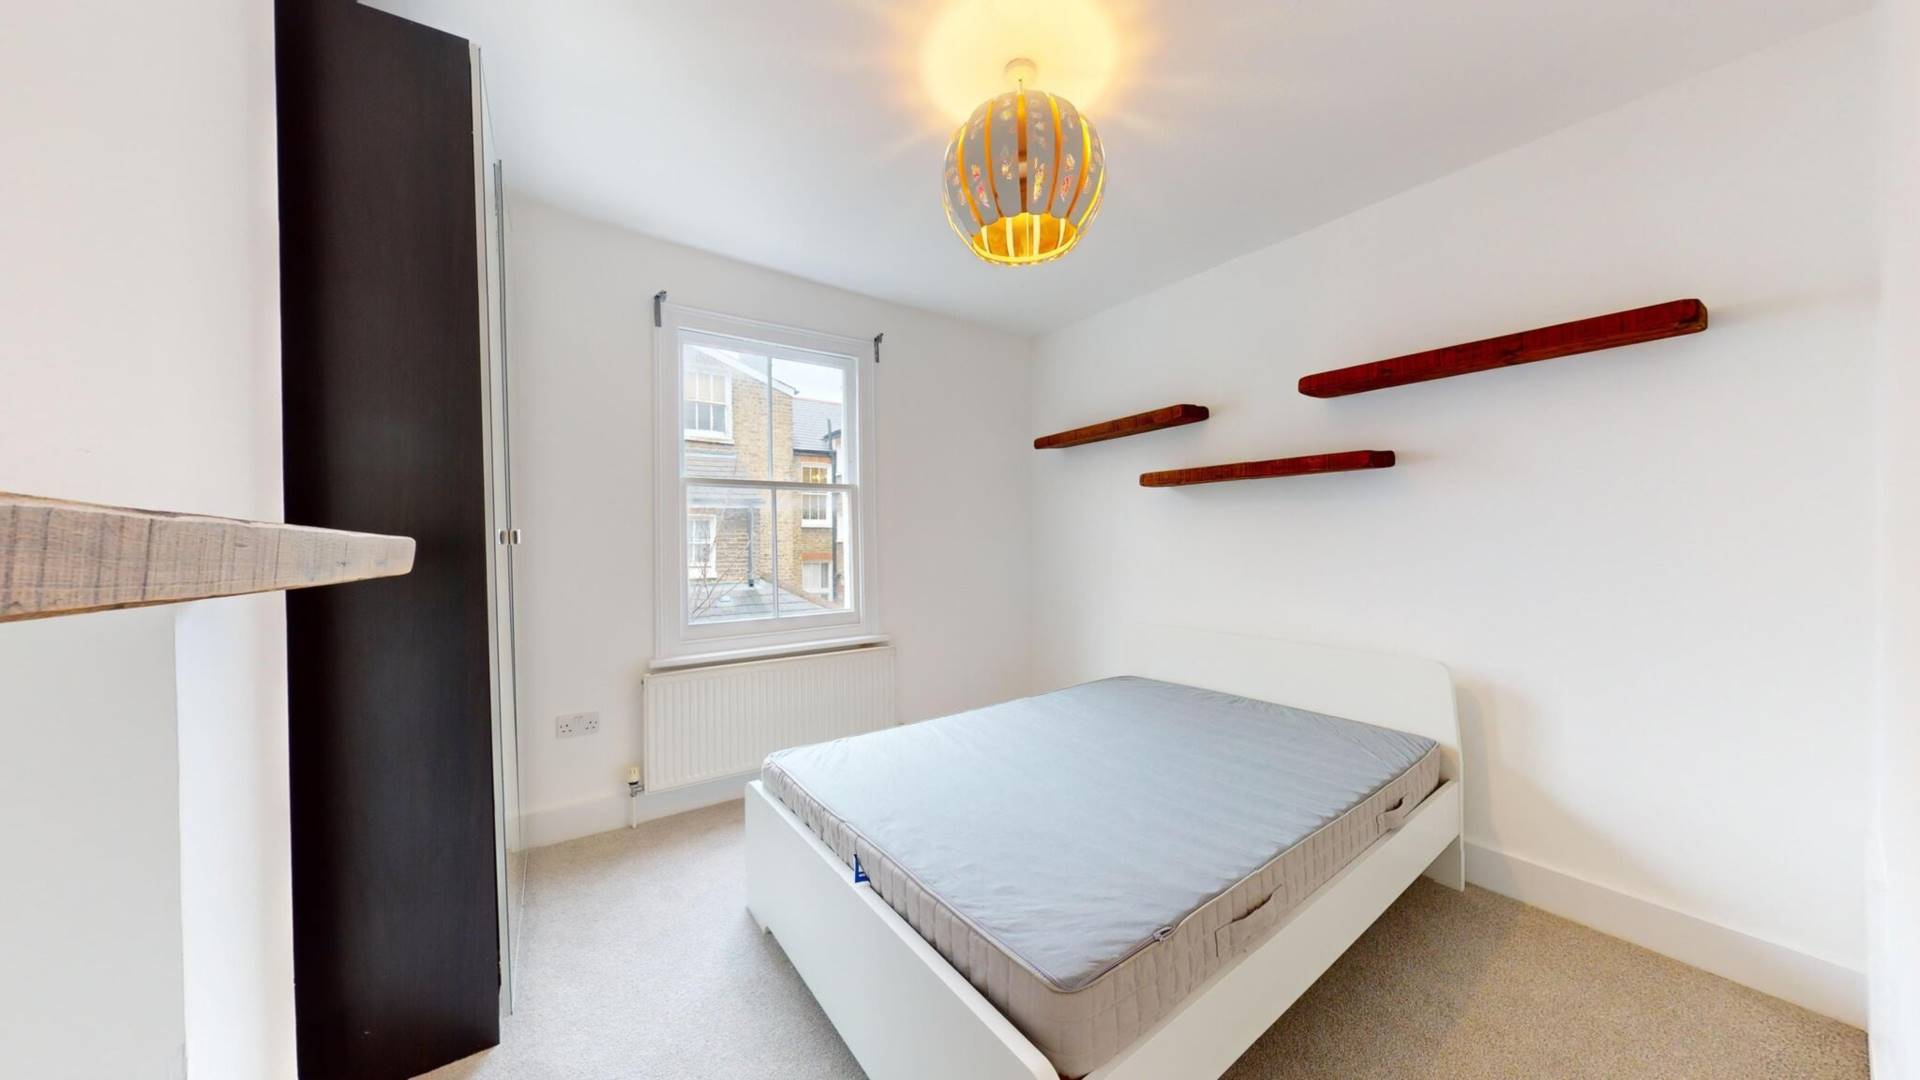 4 bed house, Fabian Road SW6, Image 8